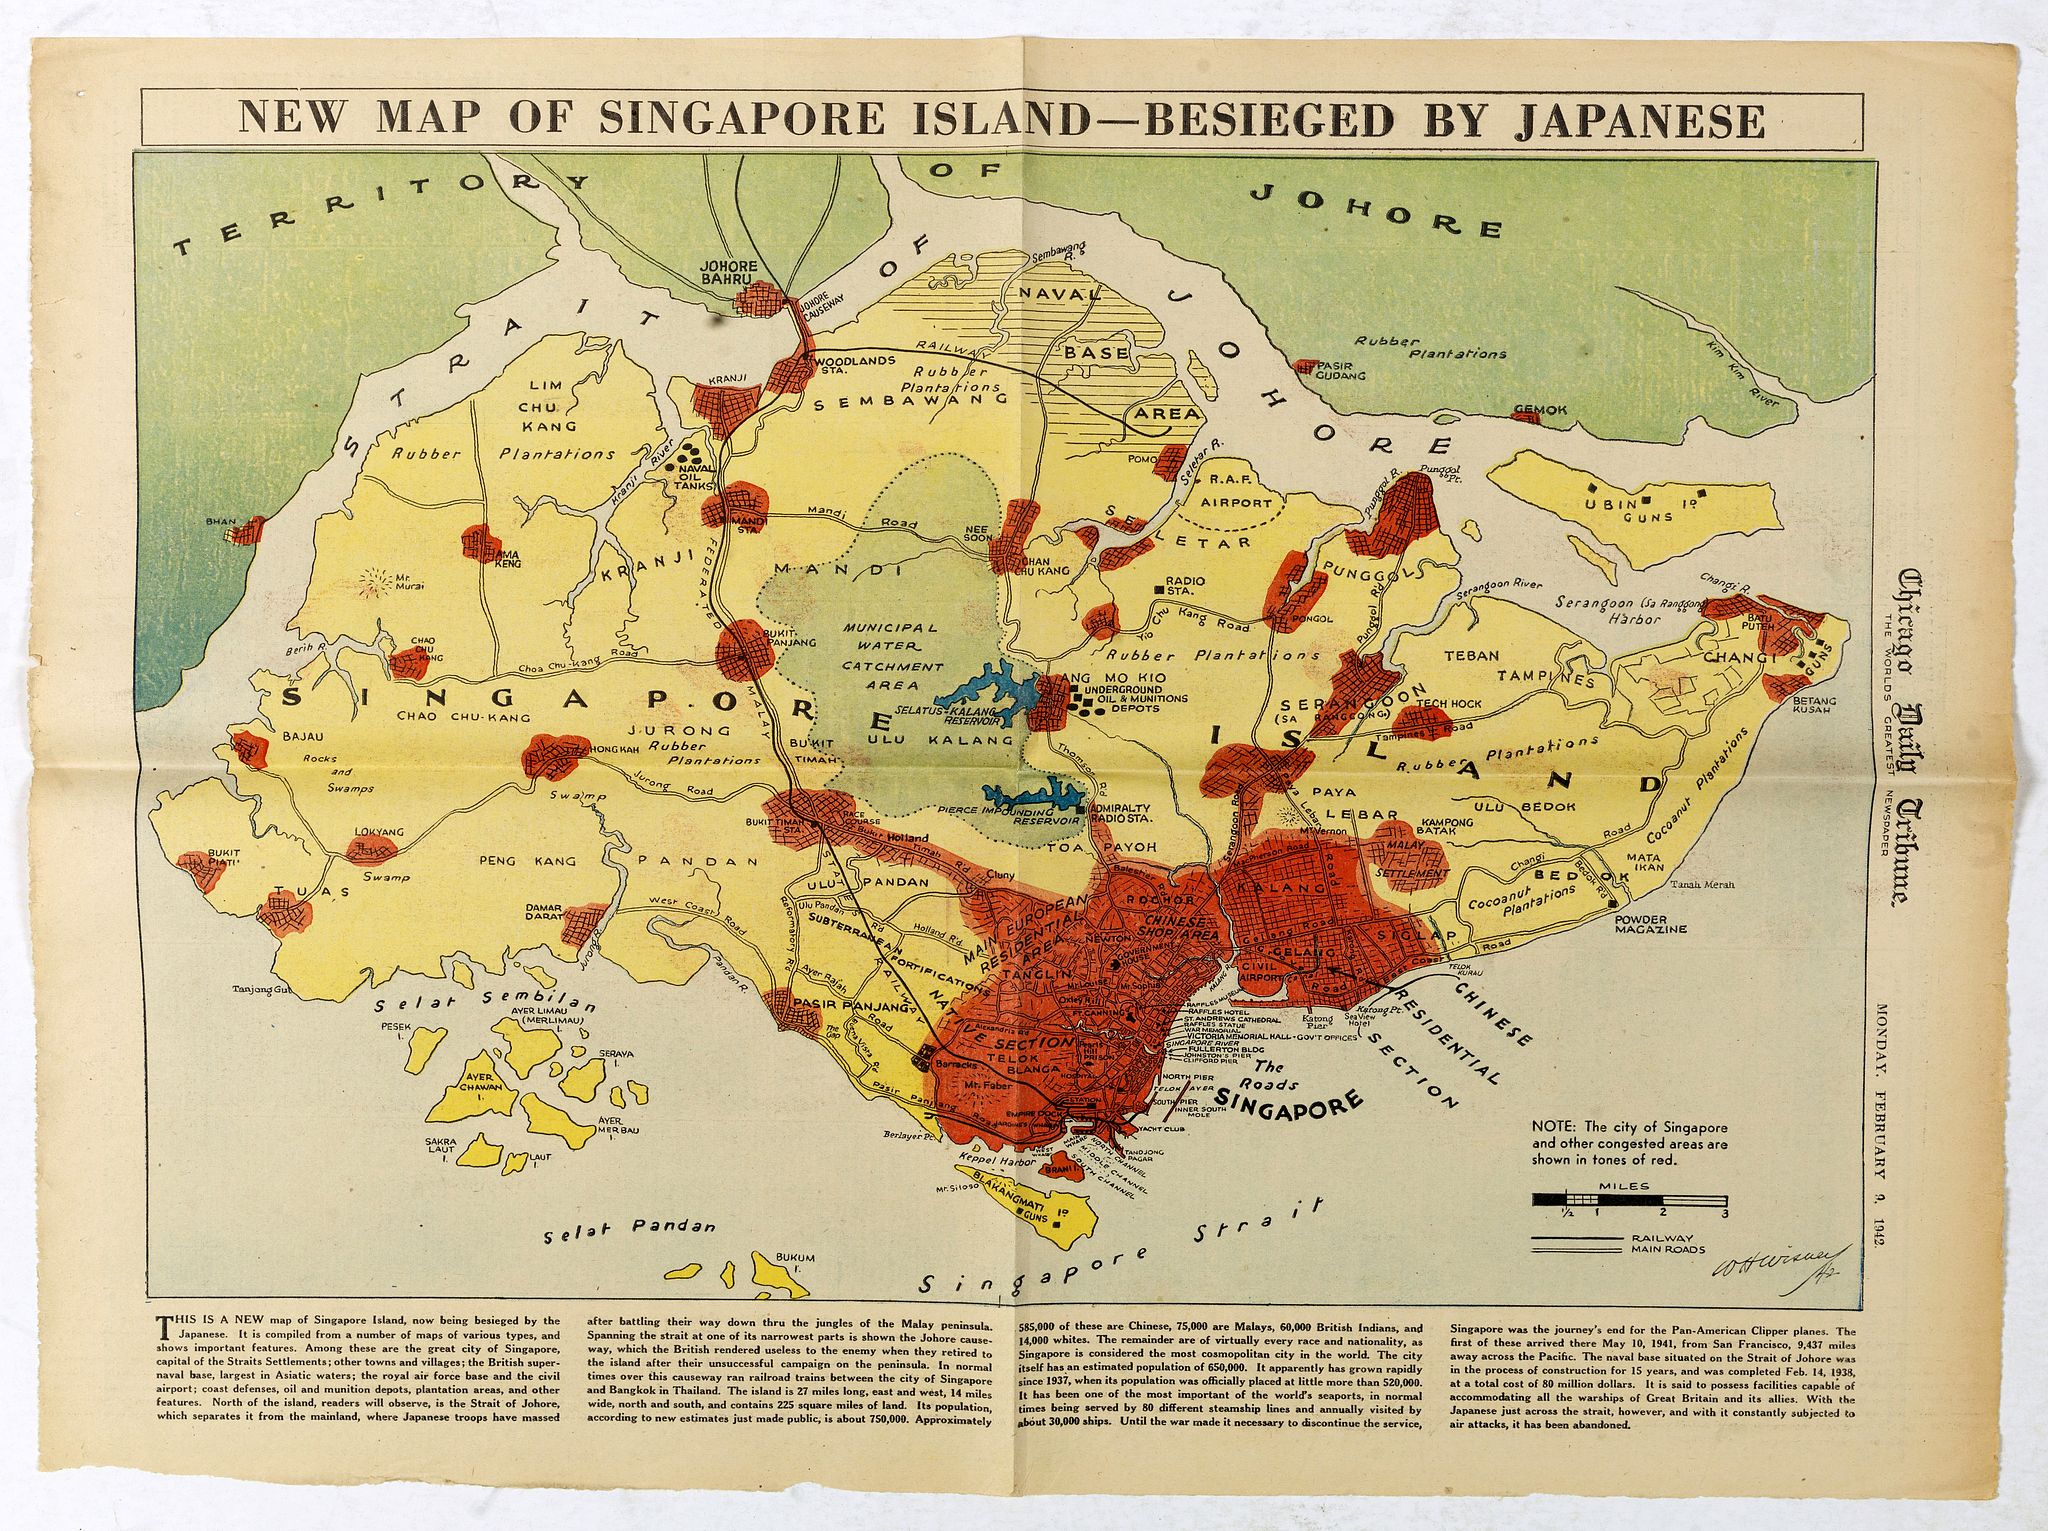 New Map of Singapore Island - Besieged by Japanese